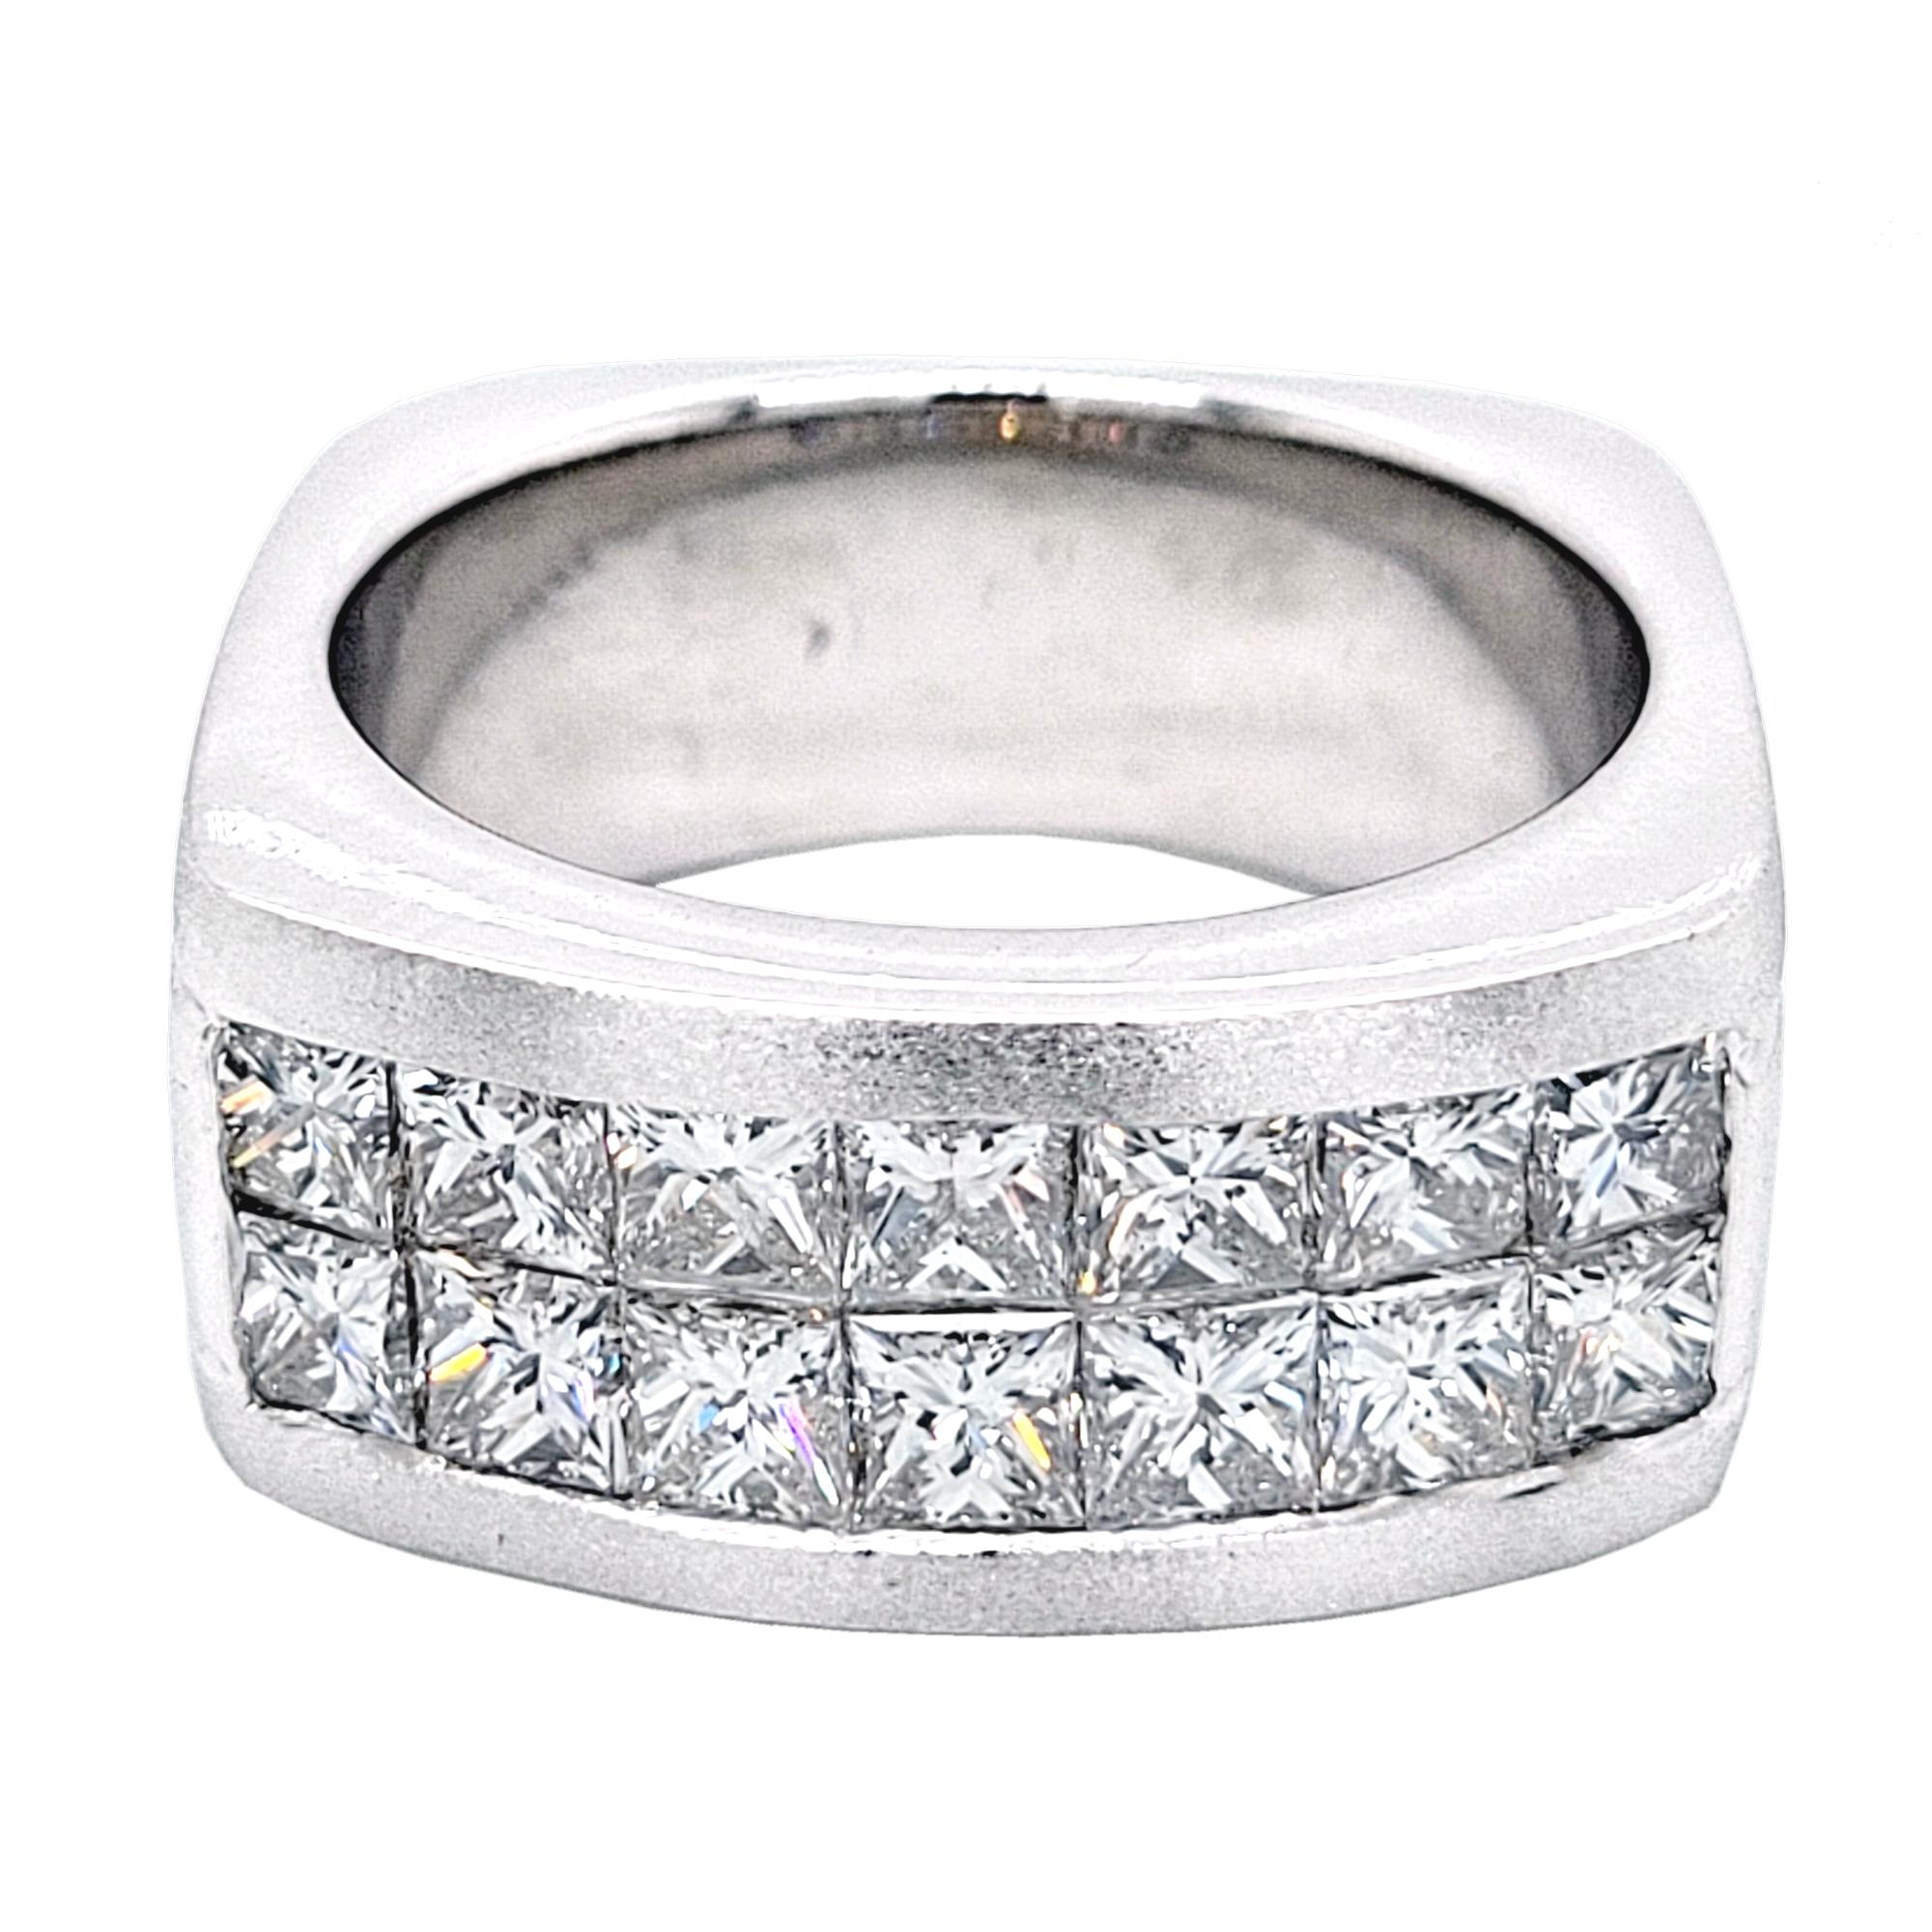 This Beautiful Gent's ring is made in 18K white gold with shiny middle and matted sides. It has 14 pieces of perfectly matched 3.4 mm princess cut diamonds (Total Weight 3.51 Ct) invisible set on the top. The ring is square shaped shank.
Total